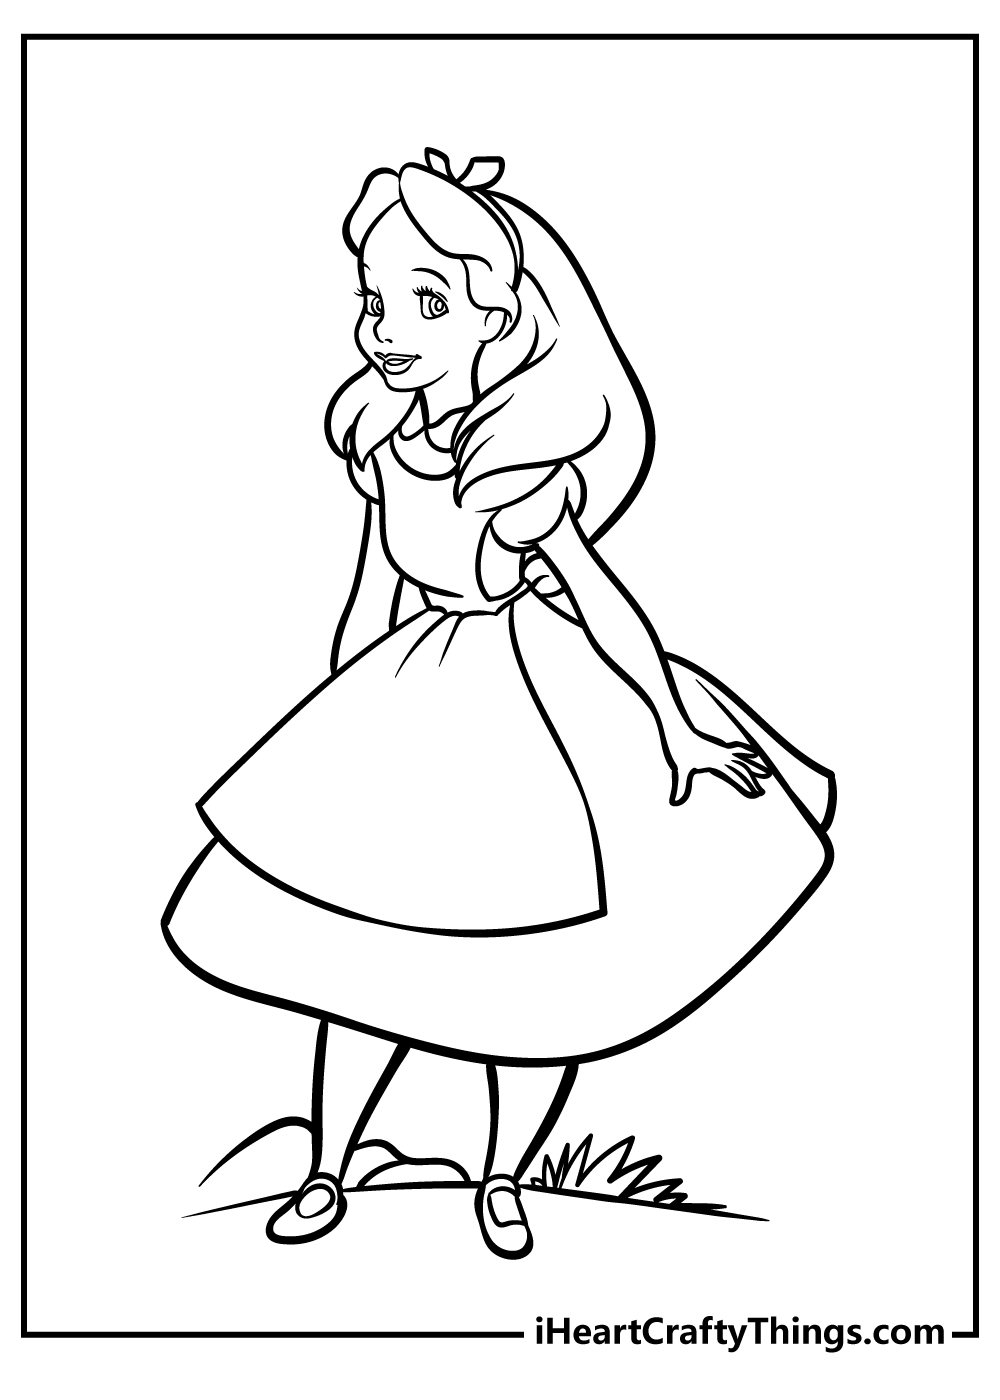 Digital Prints Prints Art Collectibles Coloring Pages Printable Alice In Wonderland coloring 